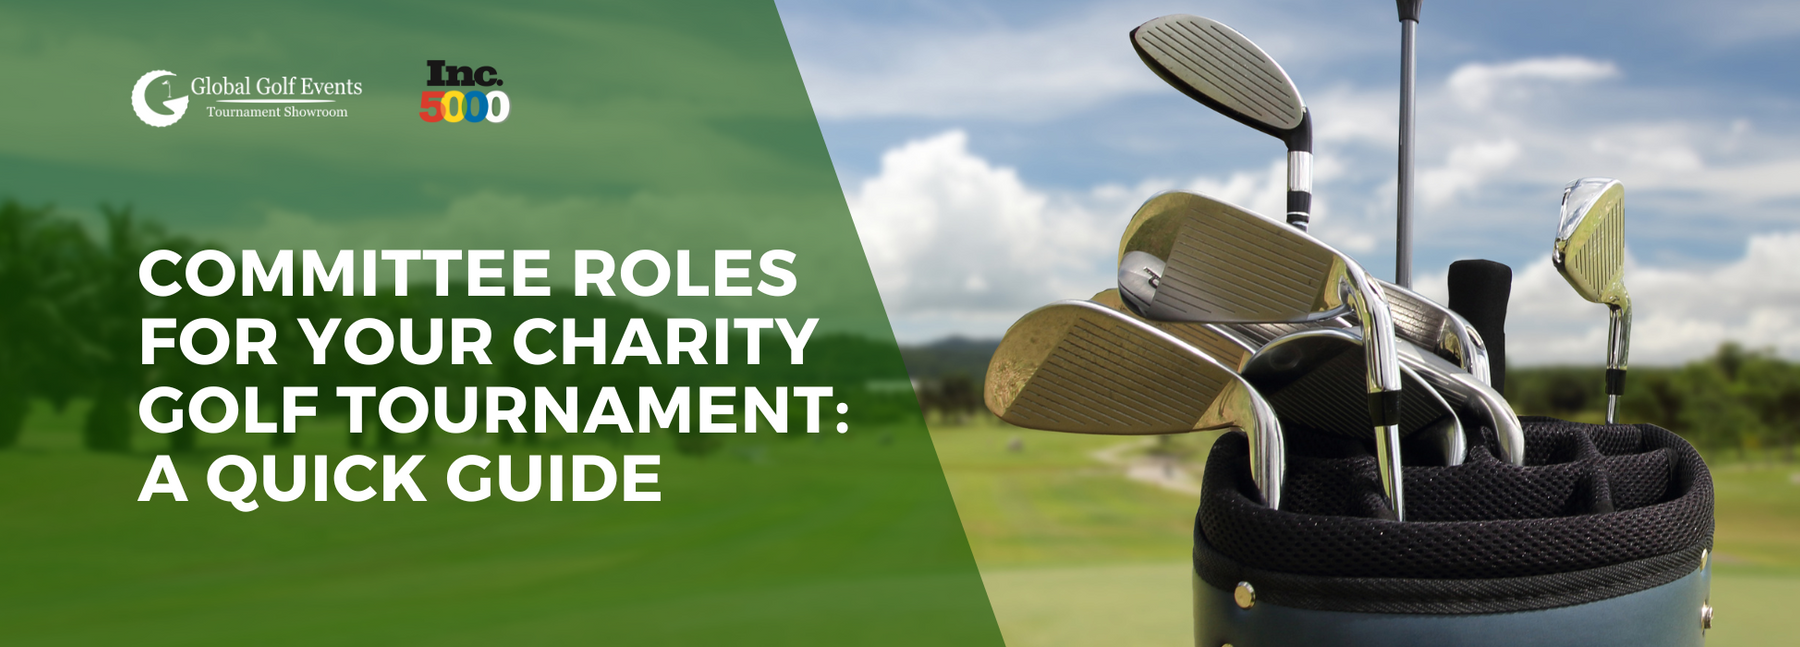 Committee Roles for Your Charity Golf Tournament: A Quick Guide